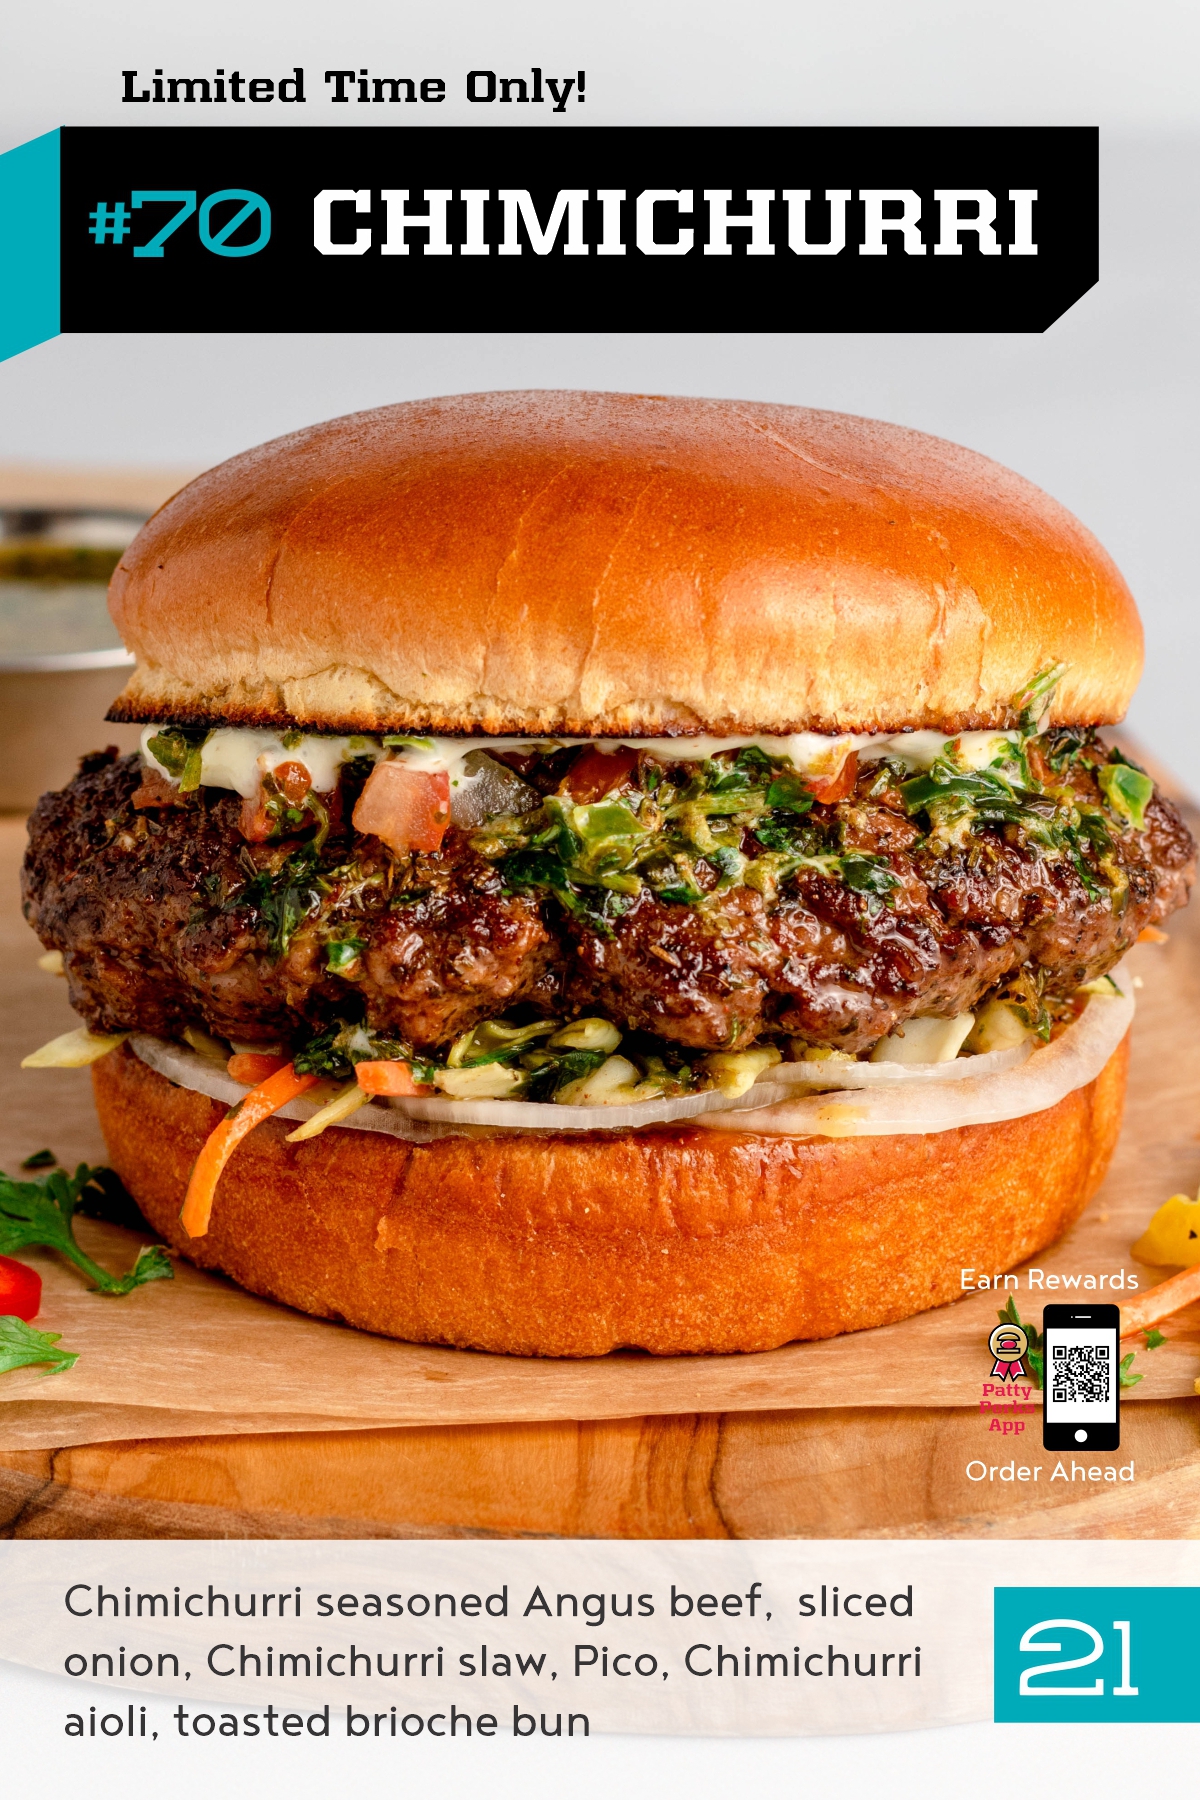 Limited Time Only: #70 Chimichurri